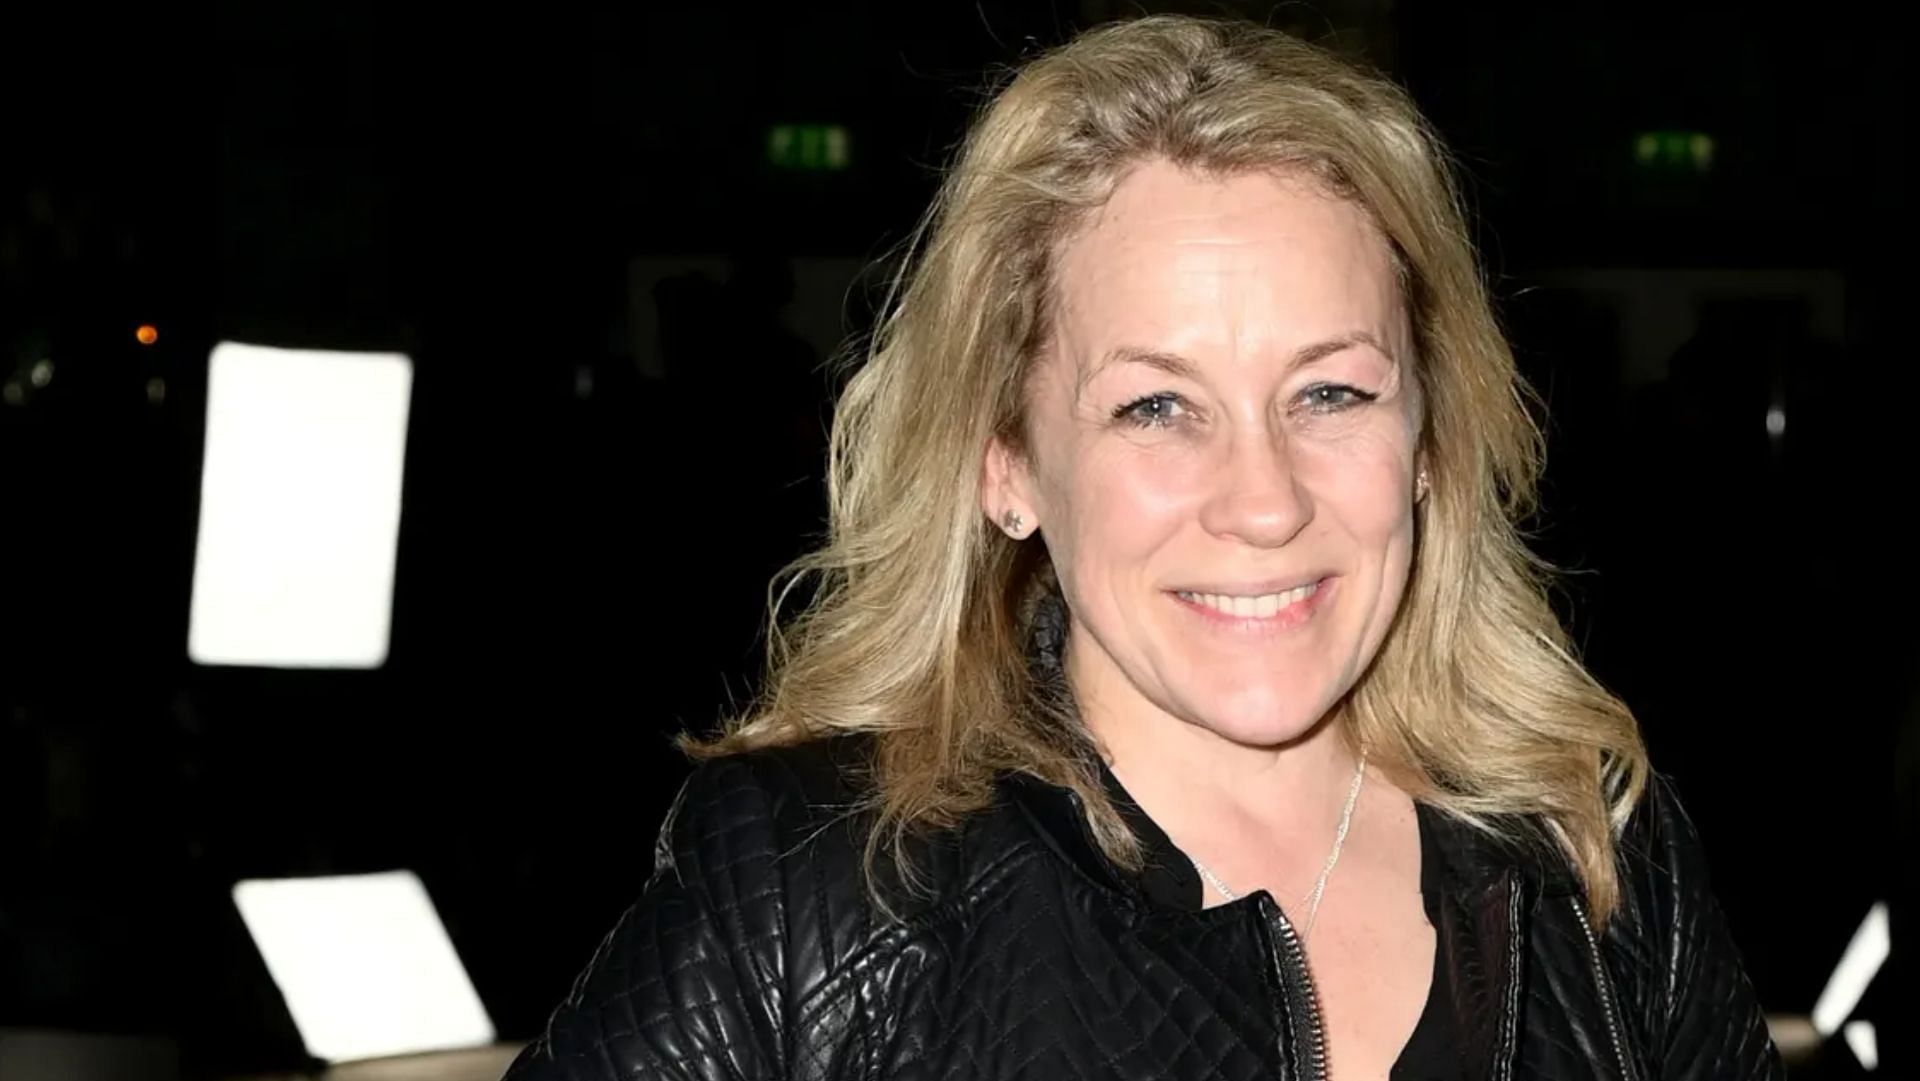 Sarah Beeny revealed she cut her hair with the help of her family and donated it to a charity that makes free wigs for children with cancer. (Image via Gareth Cattermole/Getty)